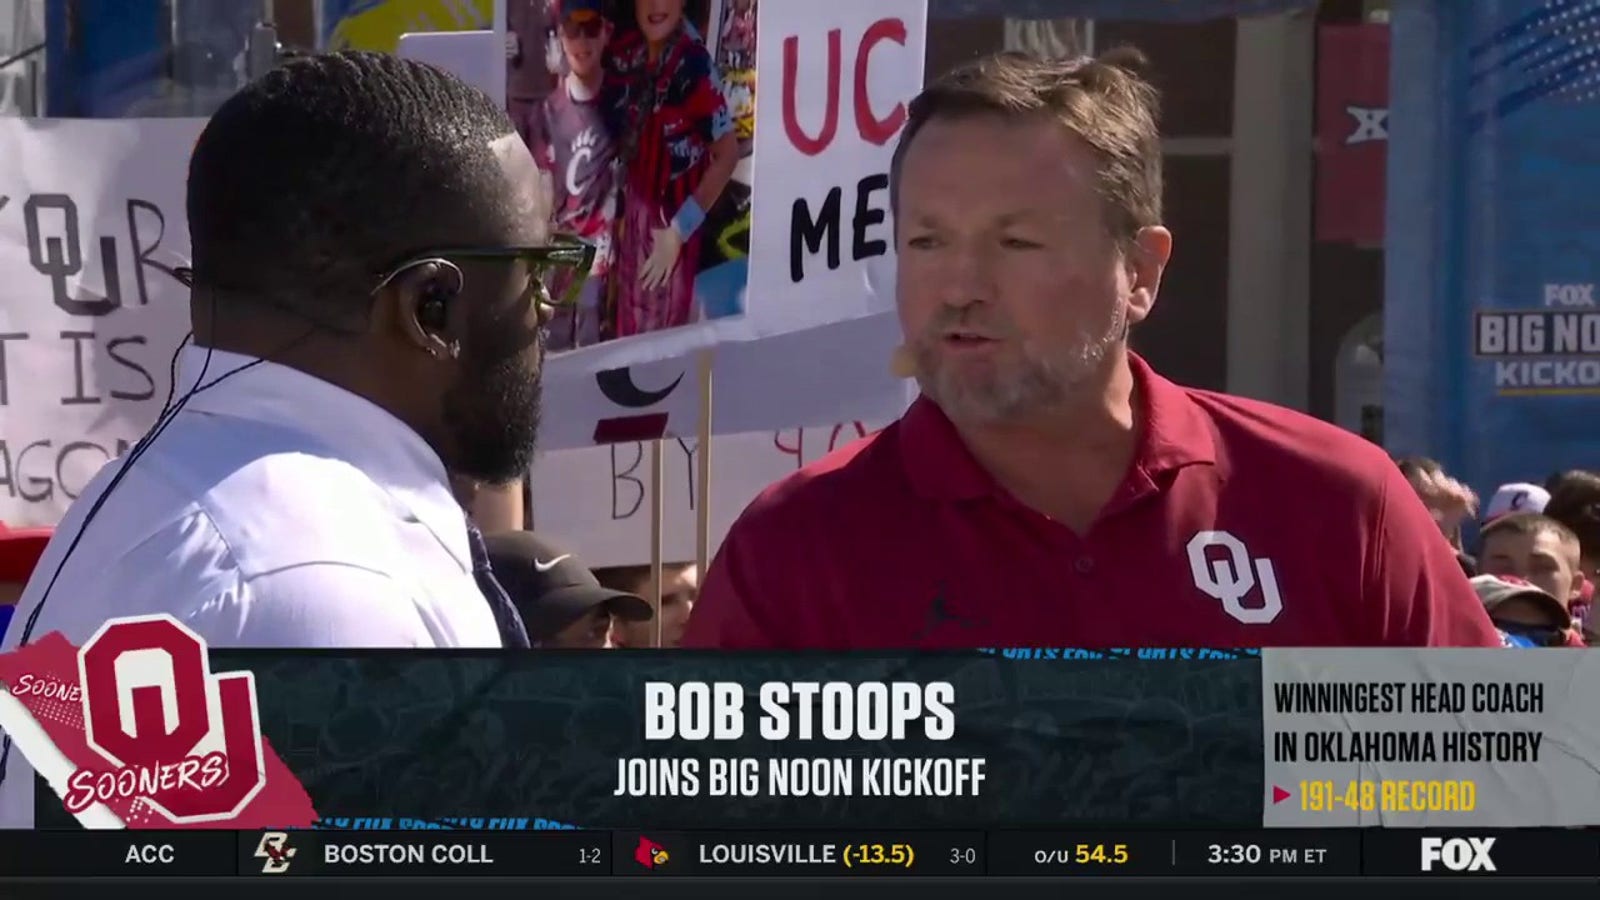 Former Oklahoma coach Bob Stoops helps preview the game